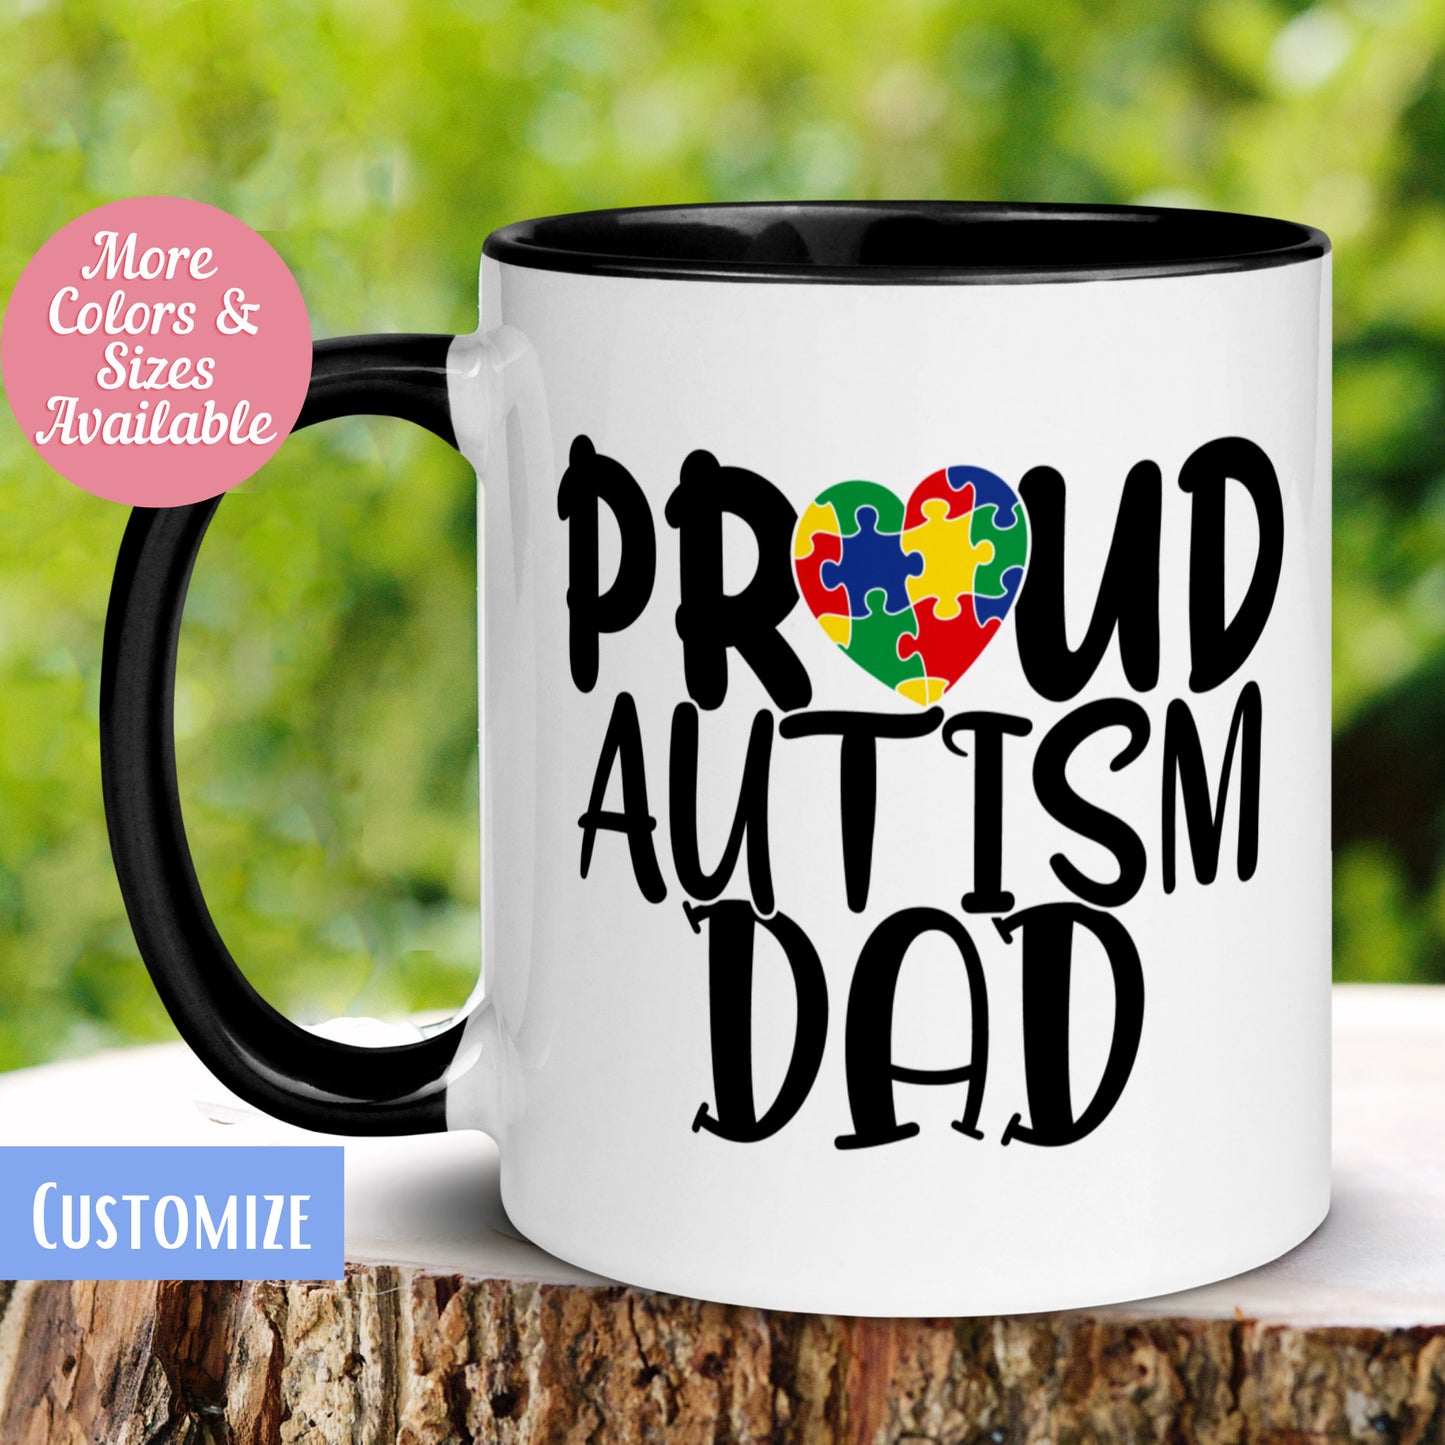 Autism Mug, Proud Autism Dad Mug, Autism Awareness Cup, Coffee Cup, Birthday Gift for Him, Father's Day Gift, Parent of Autistic Child, 118